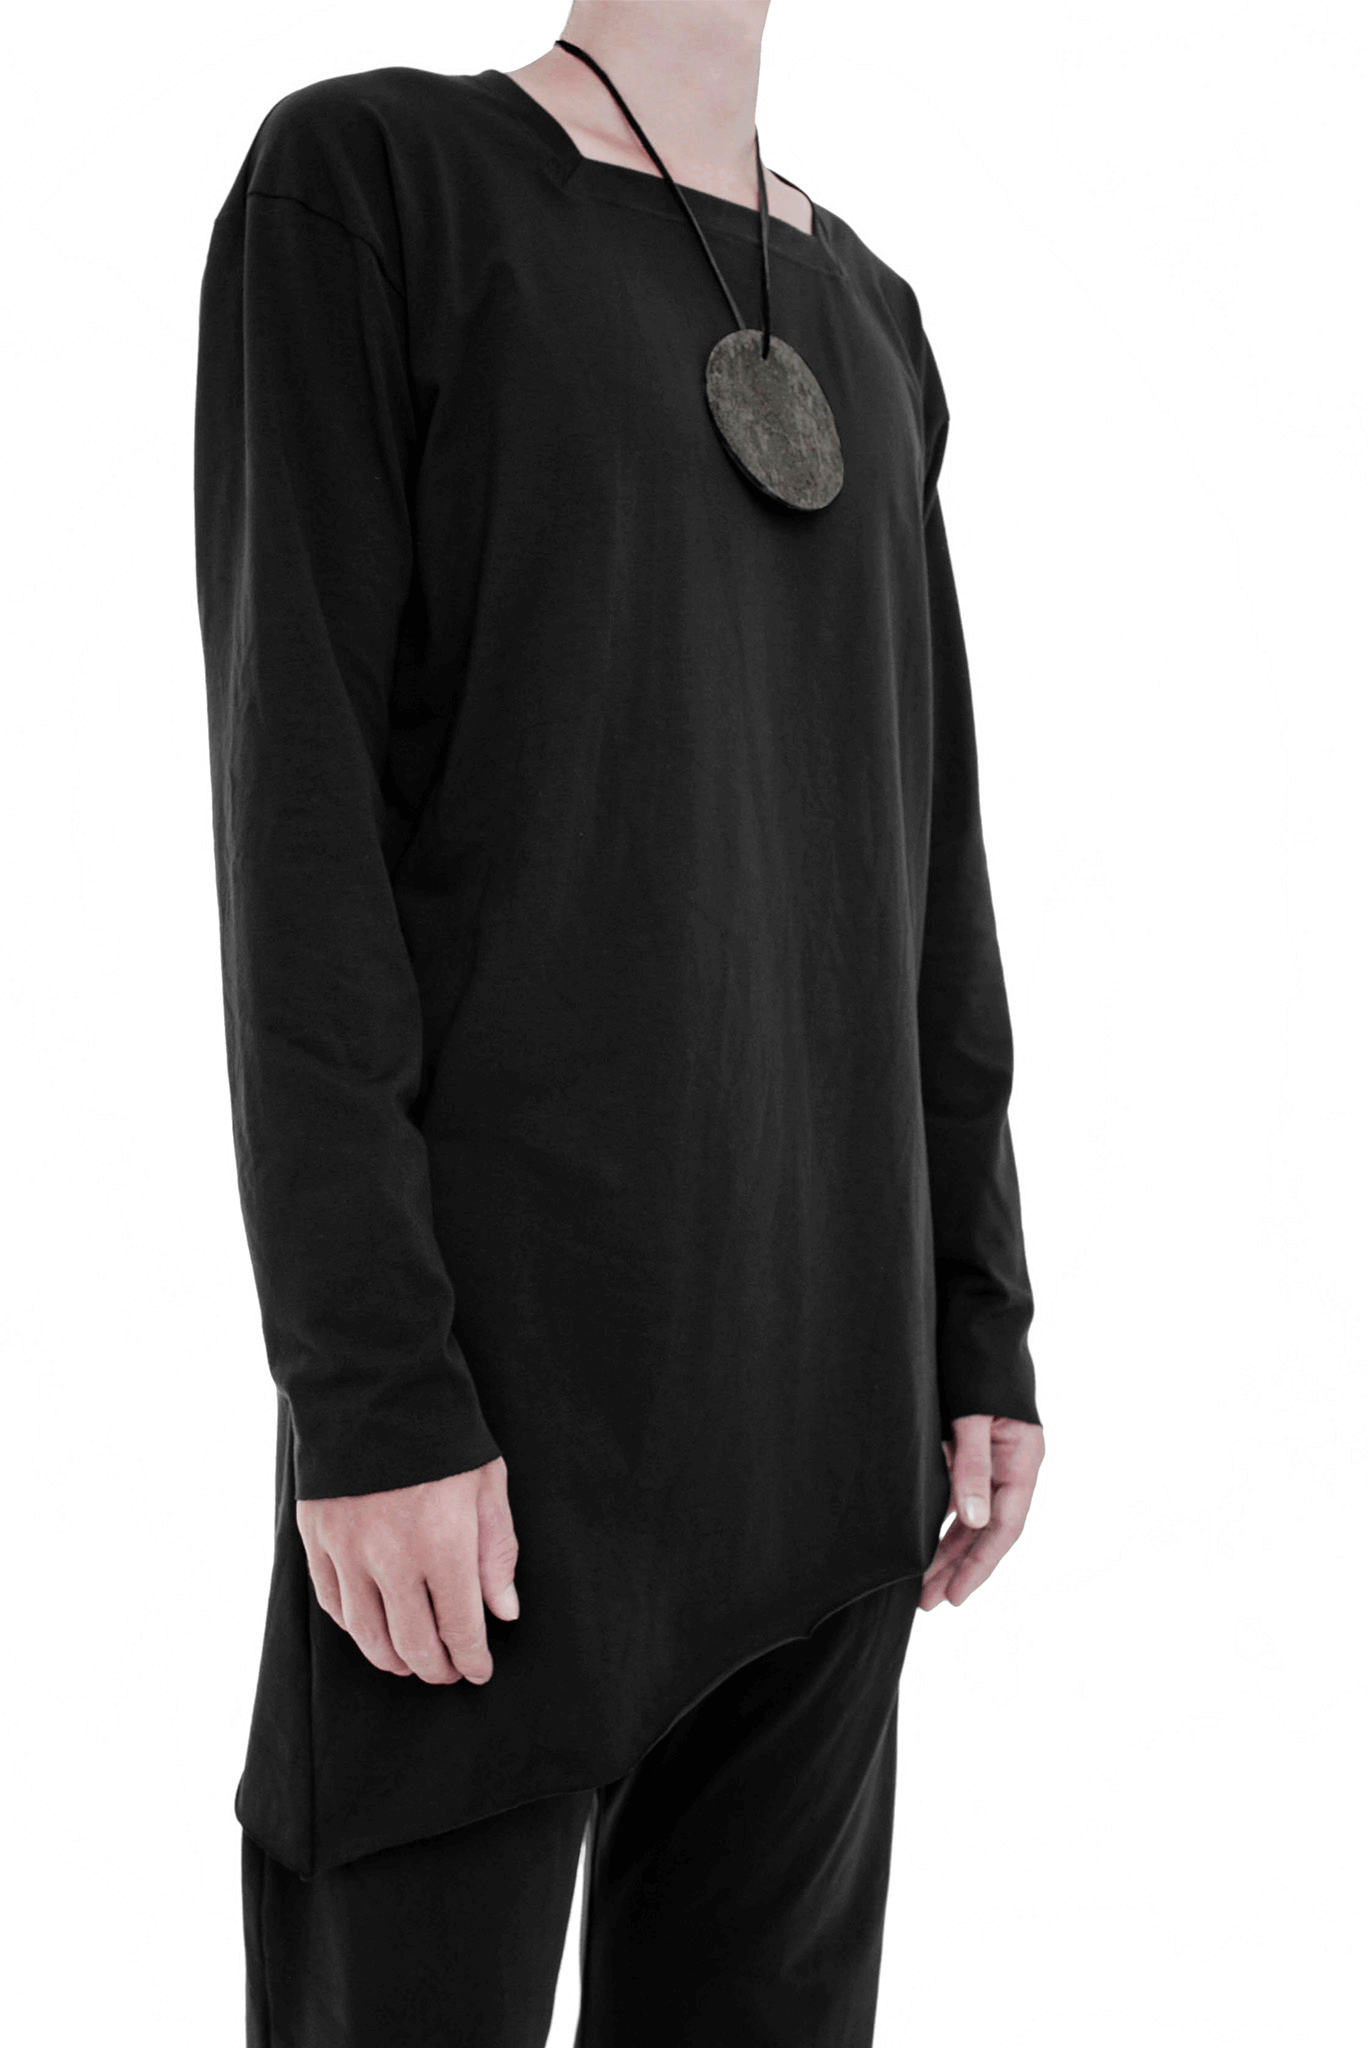 URBAN ORGANIC OVERSIZED LONG SLEEVE WITH SQUARE NECK - OVERZ®